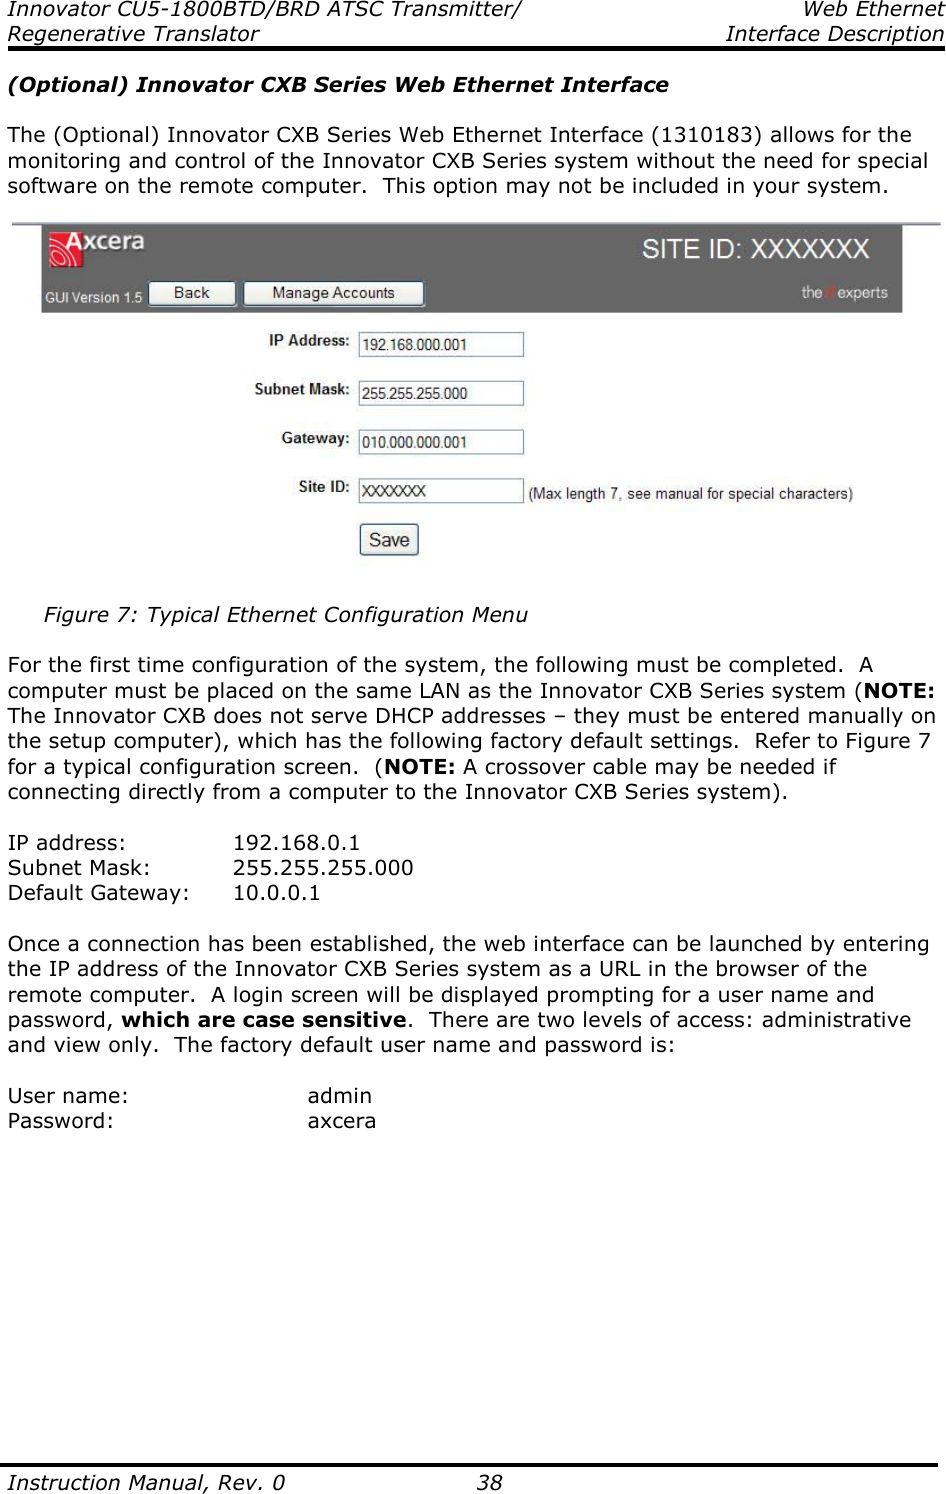 Innovator CU5-1800BTD/BRD ATSC Transmitter/  Web Ethernet Regenerative Translator    Interface Description  Instruction Manual, Rev. 0    38 (Optional) Innovator CXB Series Web Ethernet Interface  The (Optional) Innovator CXB Series Web Ethernet Interface (1310183) allows for the monitoring and control of the Innovator CXB Series system without the need for special software on the remote computer.  This option may not be included in your system.          Figure 7: Typical Ethernet Configuration Menu  For the first time configuration of the system, the following must be completed.  A computer must be placed on the same LAN as the Innovator CXB Series system (NOTE: The Innovator CXB does not serve DHCP addresses – they must be entered manually on the setup computer), which has the following factory default settings.  Refer to Figure 7 for a typical configuration screen.  (NOTE: A crossover cable may be needed if connecting directly from a computer to the Innovator CXB Series system).  IP address:     192.168.0.1 Subnet Mask:   255.255.255.000 Default Gateway:  10.0.0.1  Once a connection has been established, the web interface can be launched by entering the IP address of the Innovator CXB Series system as a URL in the browser of the remote computer.  A login screen will be displayed prompting for a user name and password, which are case sensitive.  There are two levels of access: administrative and view only.  The factory default user name and password is:  User name:       admin Password:      axcera  